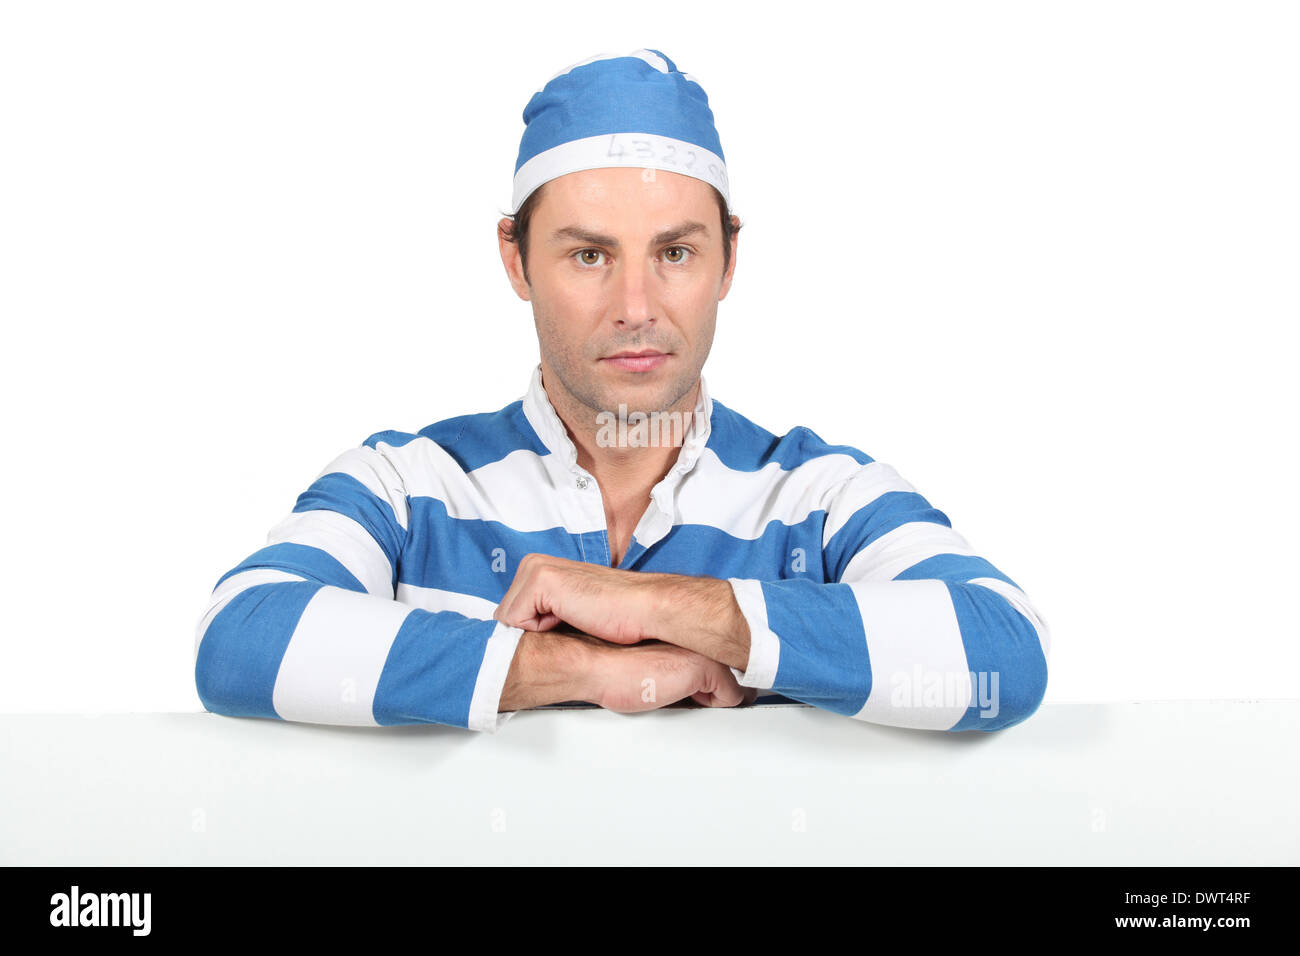 Man in prisoner outfit Stock Photo